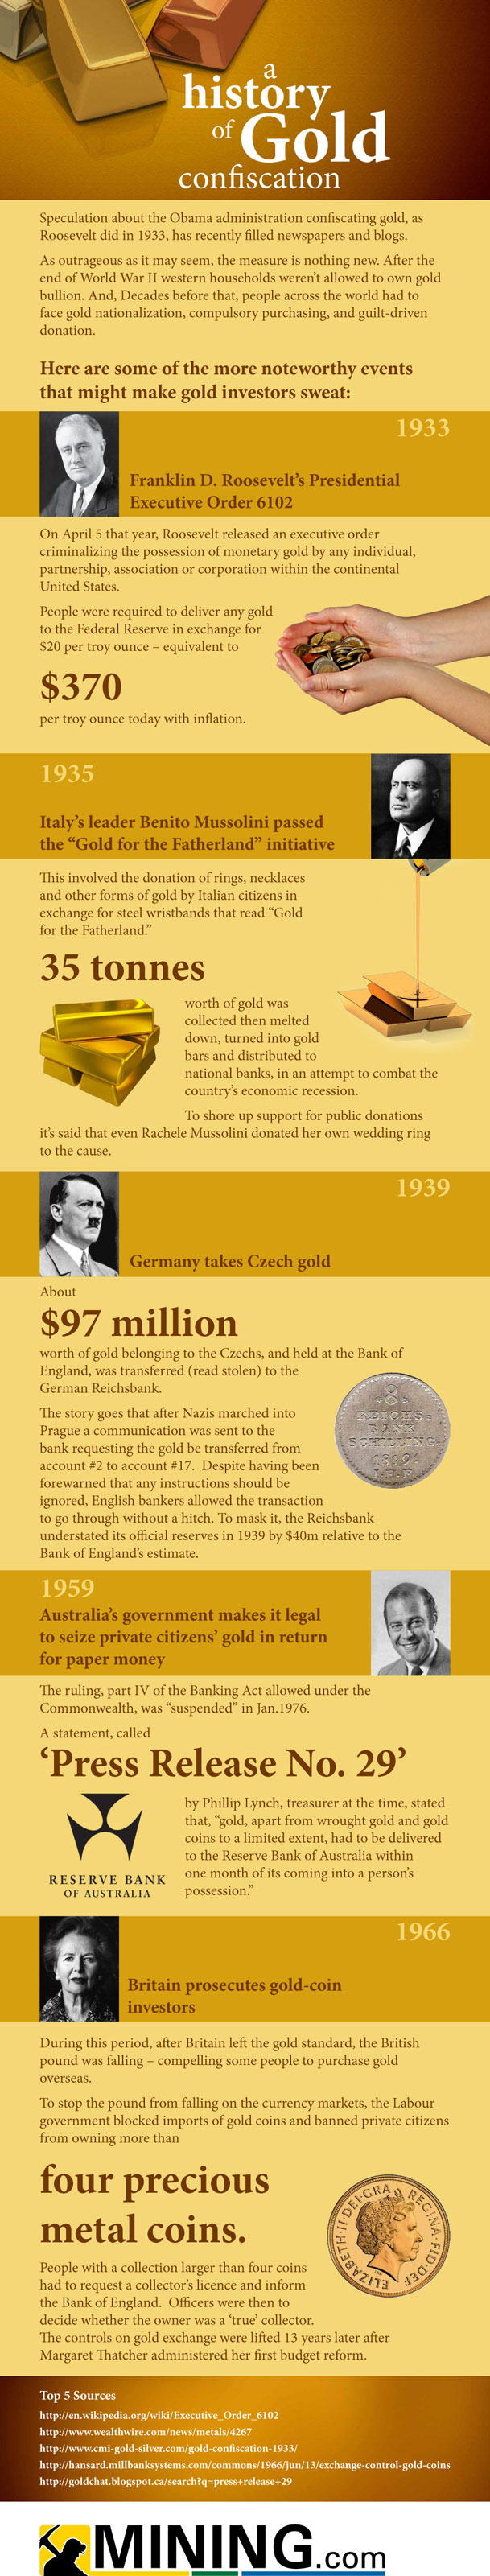 A history of gold confiscation [INFOGRAPHIC]